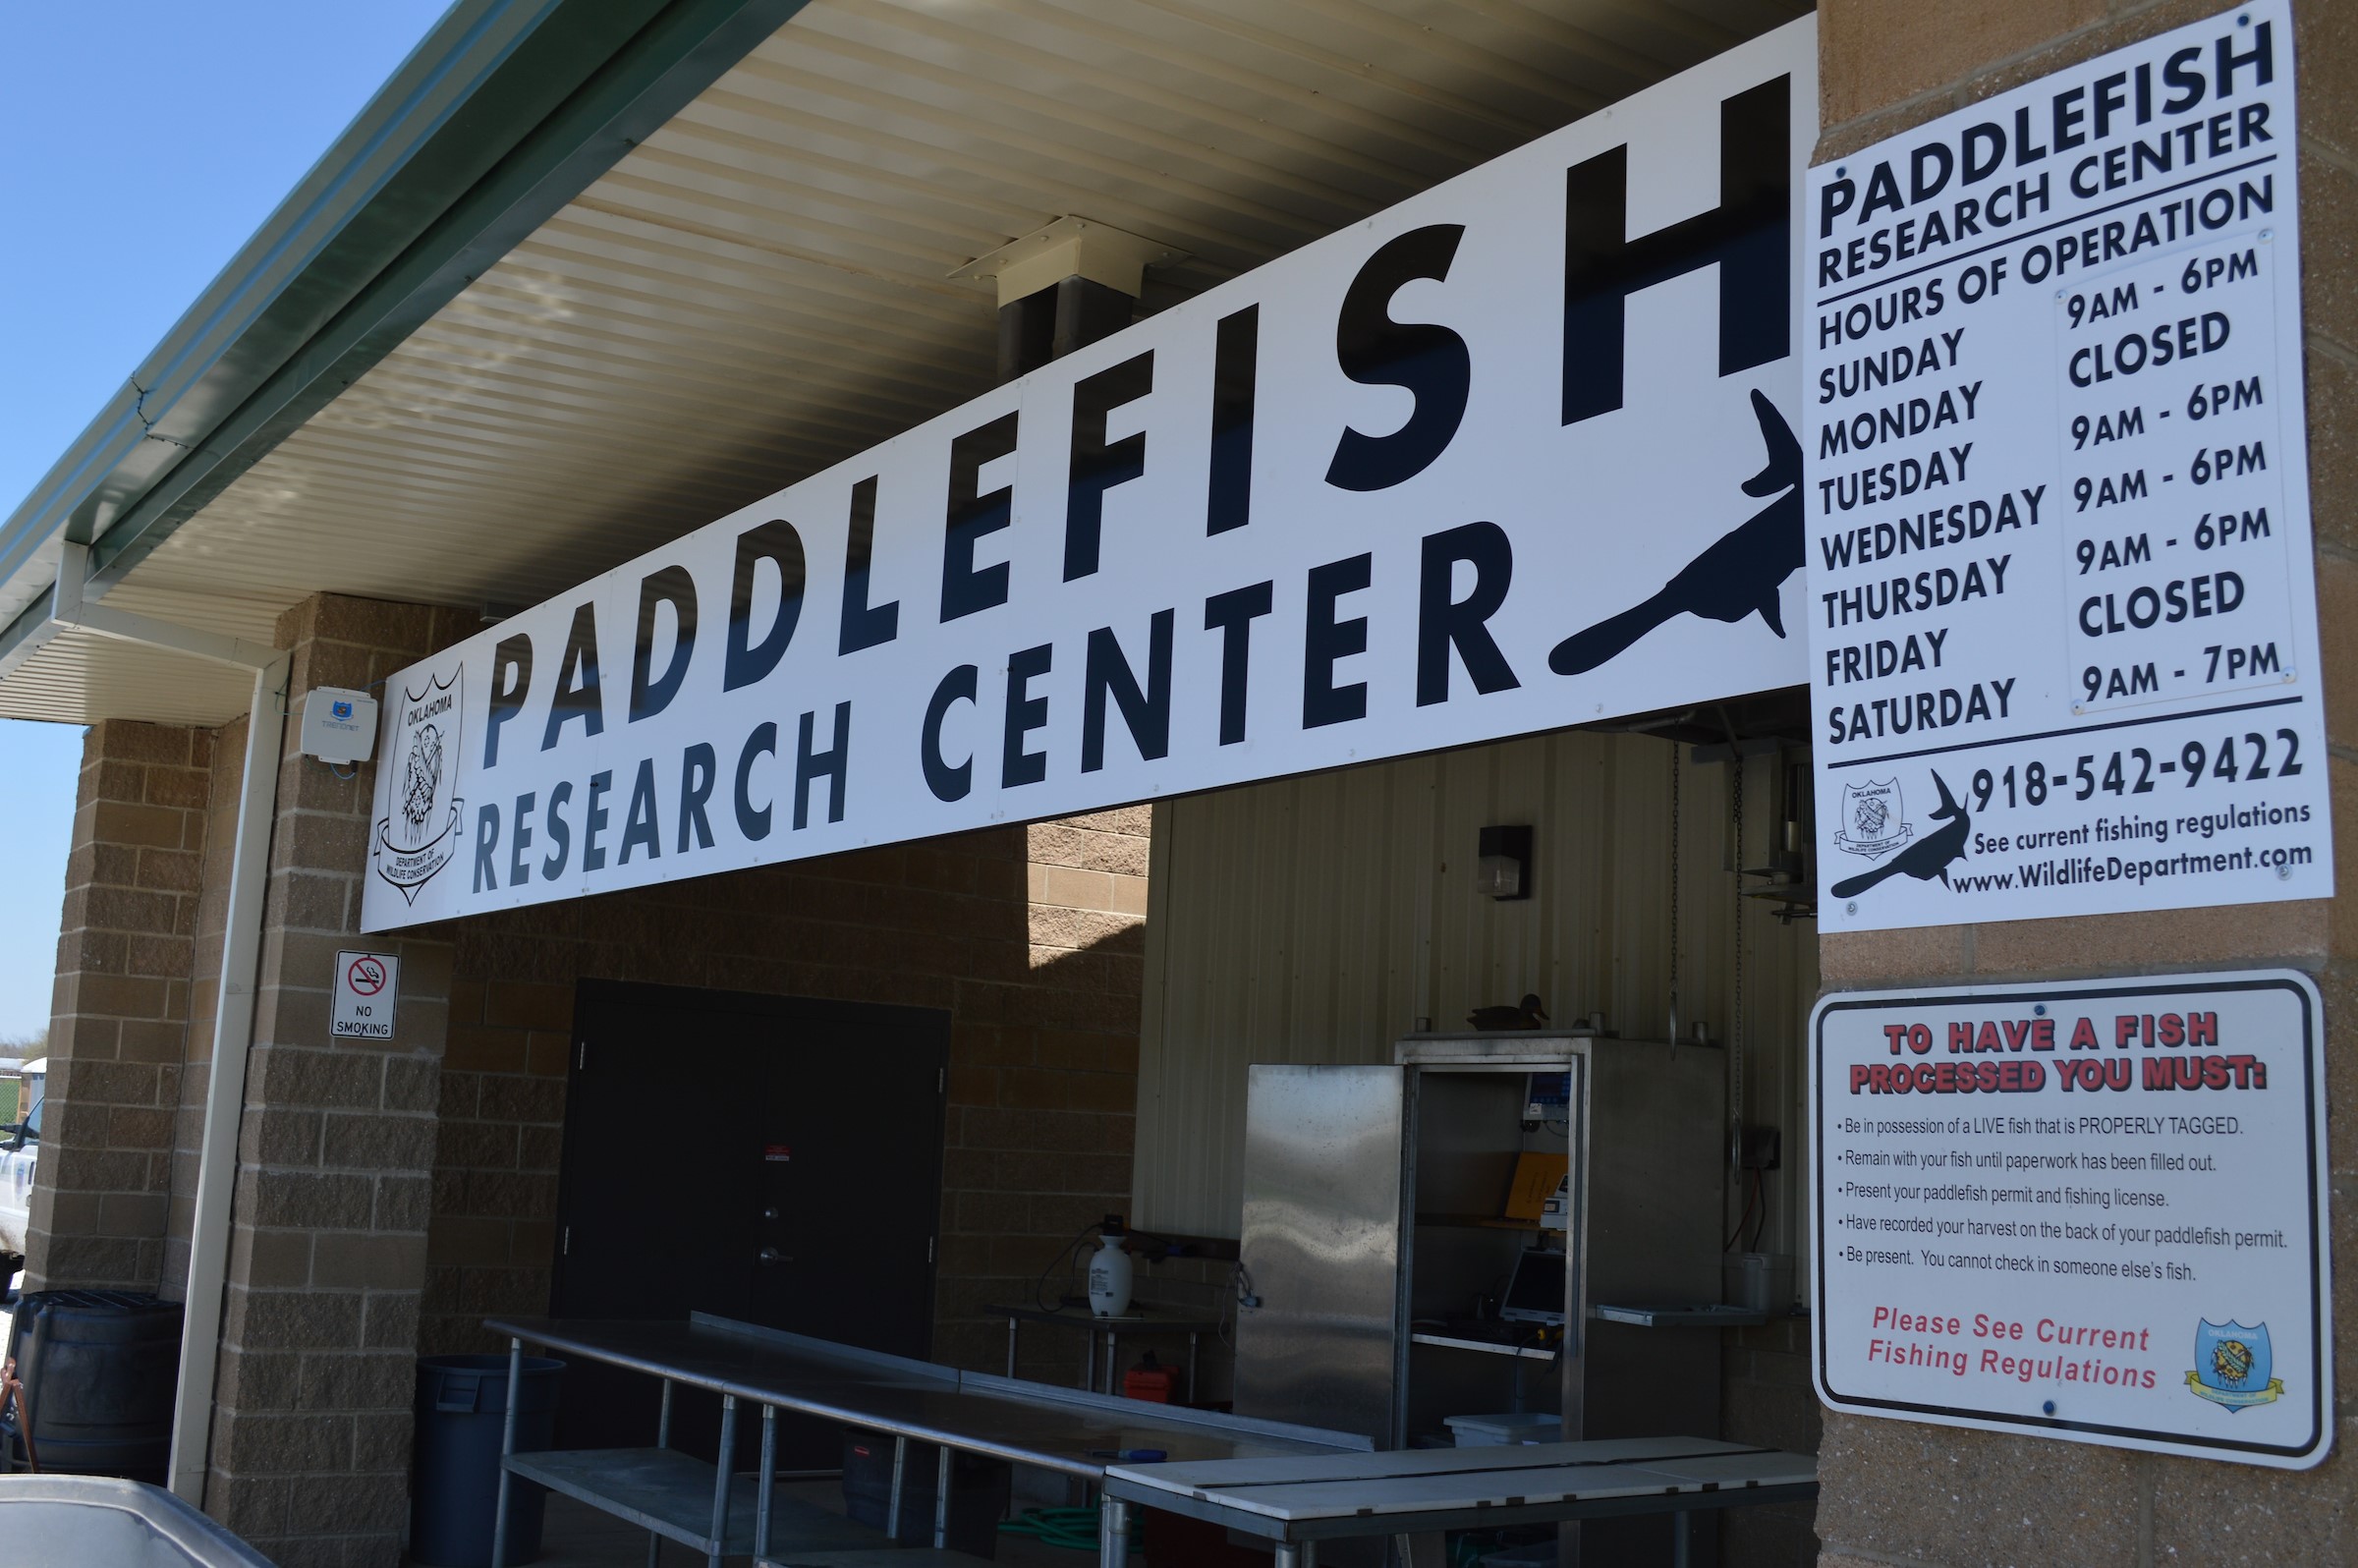 Biologists Studying Paddlefish in Oklahoma Report Reseach of the Fish Going 